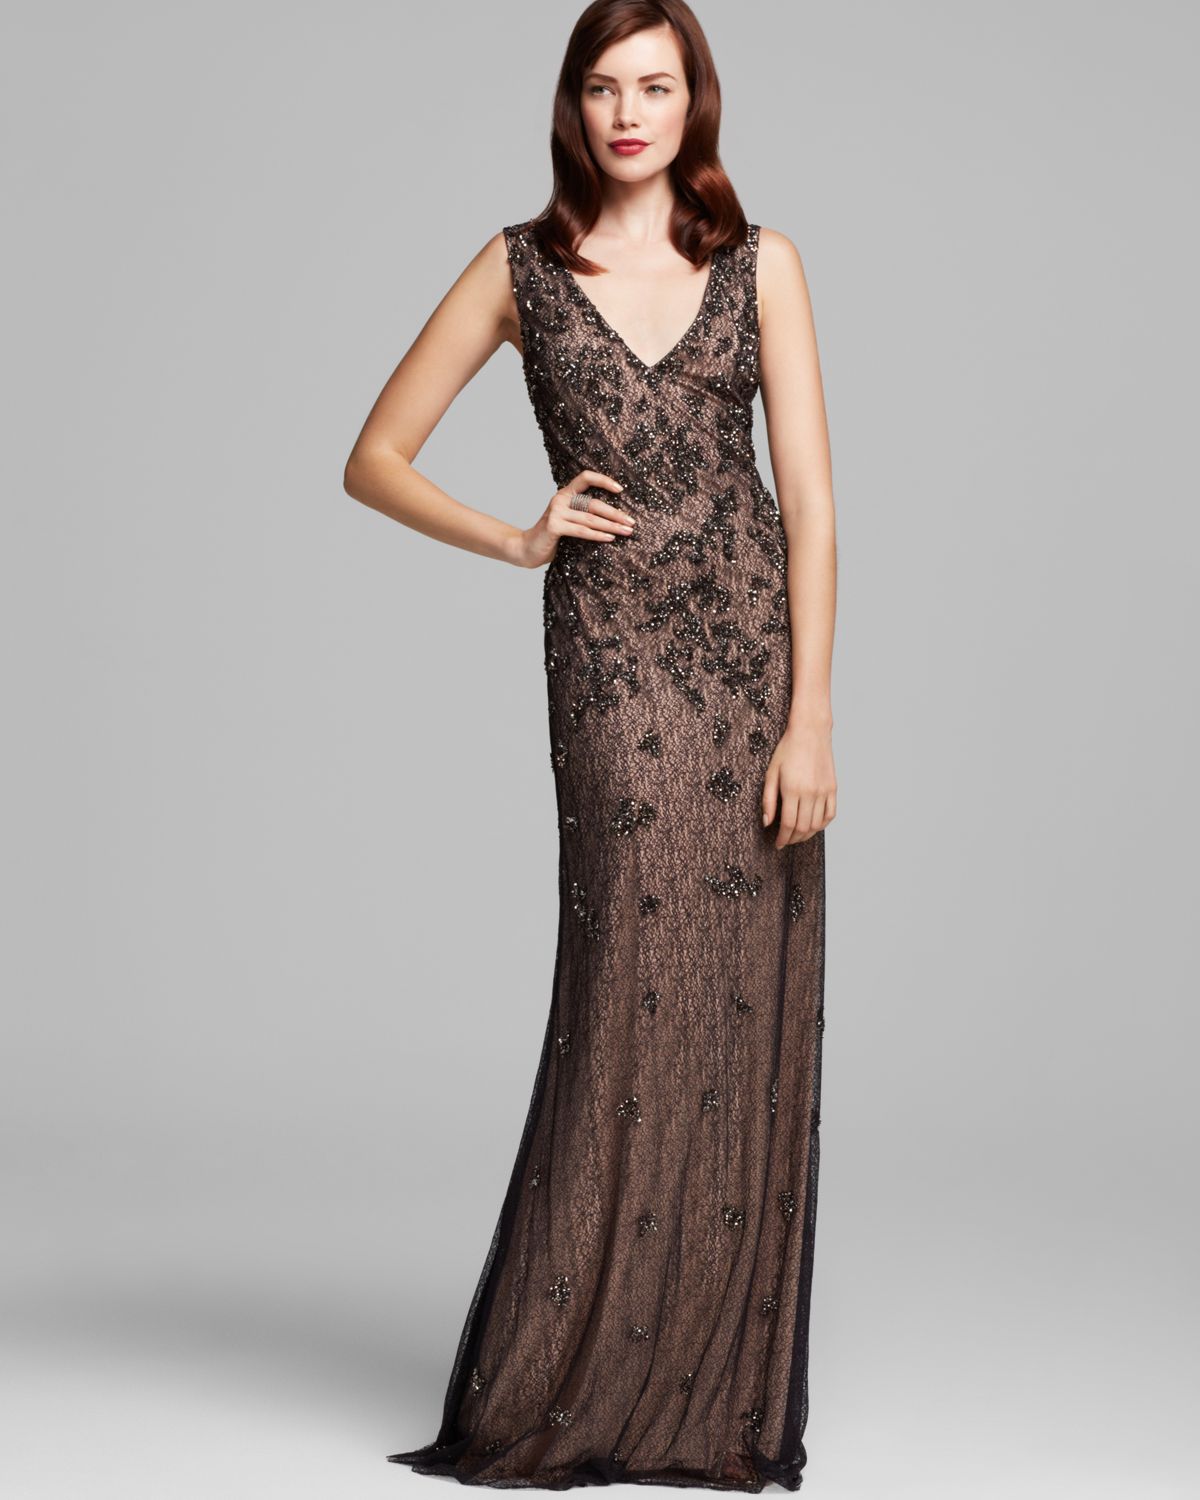 Lyst - Aidan Mattox Beaded Lace V Neck Gown in Brown